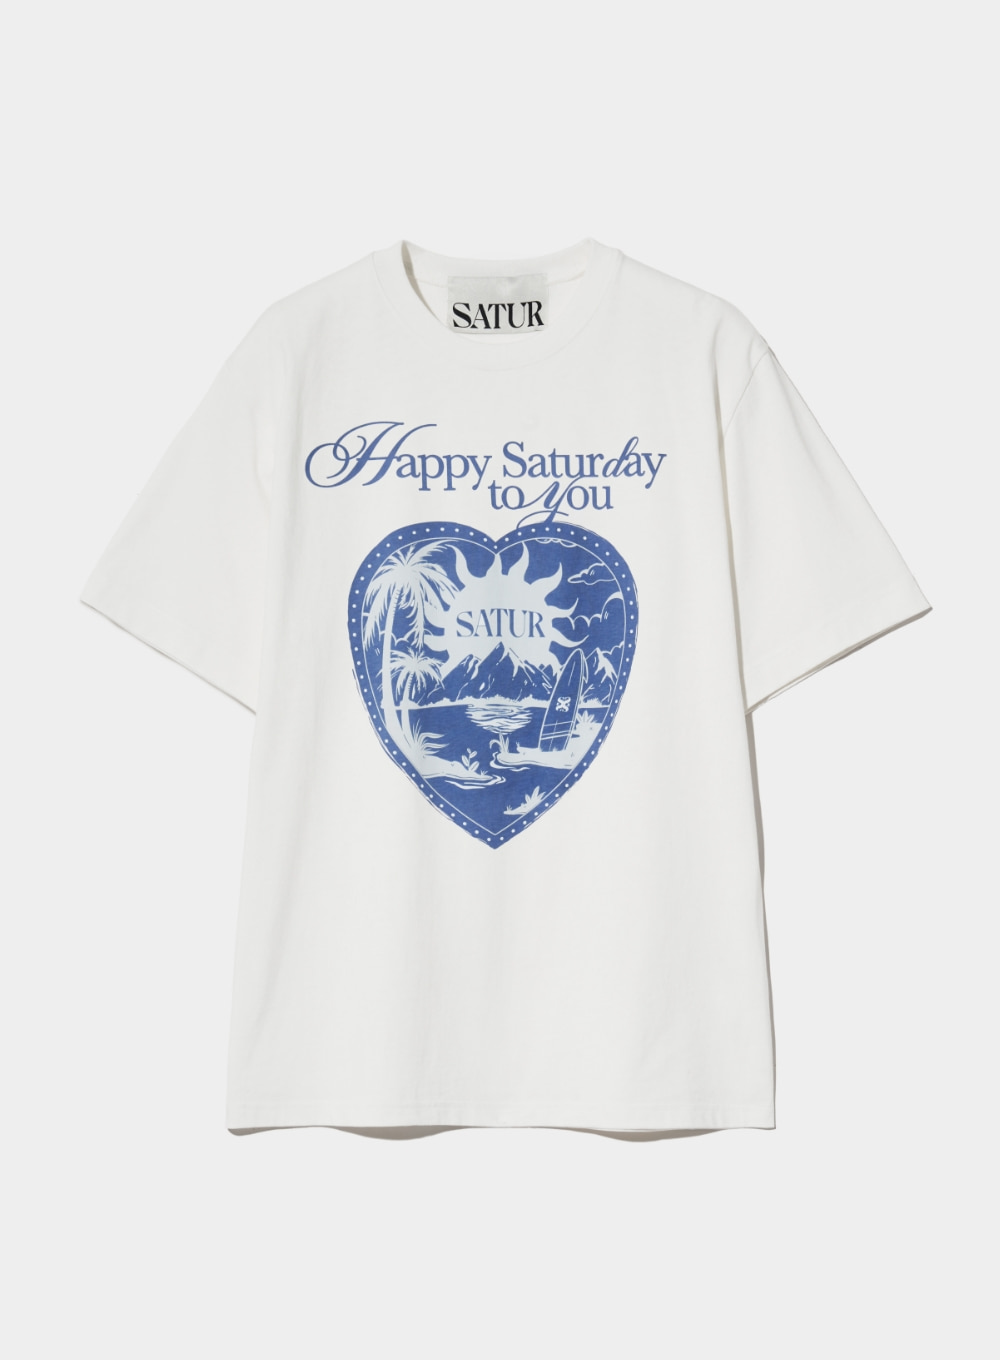 Sunrise in Heart Graphic T-Shirt - Clean White